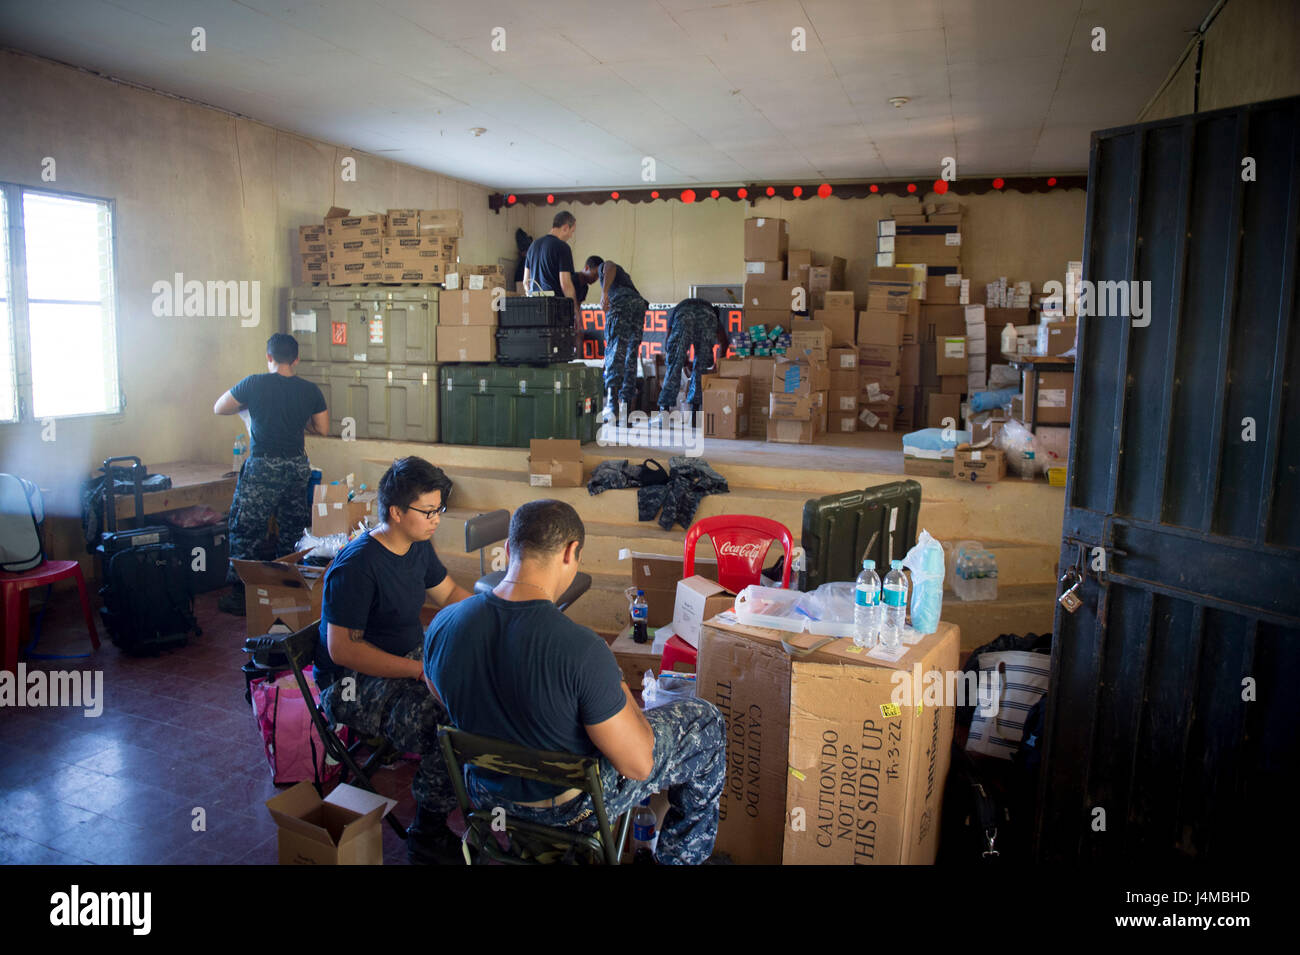 170220-N-YL073-378   TRUJILLO, Honduras (Feb. 20, 2017) Sailors organize dental supplies at the Continuing Promise 2017 (CP-17) medical site in Trujillo, Honduras. CP-17 is a U.S. Southern Command-sponsored and U.S. Naval Forces Southern Command/U.S. 4th Fleet-conducted deployment to conduct civil-military operations including humanitarian assistance, training engagements, and medical, dental, and veterinary support to Central and South America. (U.S. Navy photo by Mass Communication Specialist 2nd Class Shamira Purifoy) Stock Photo